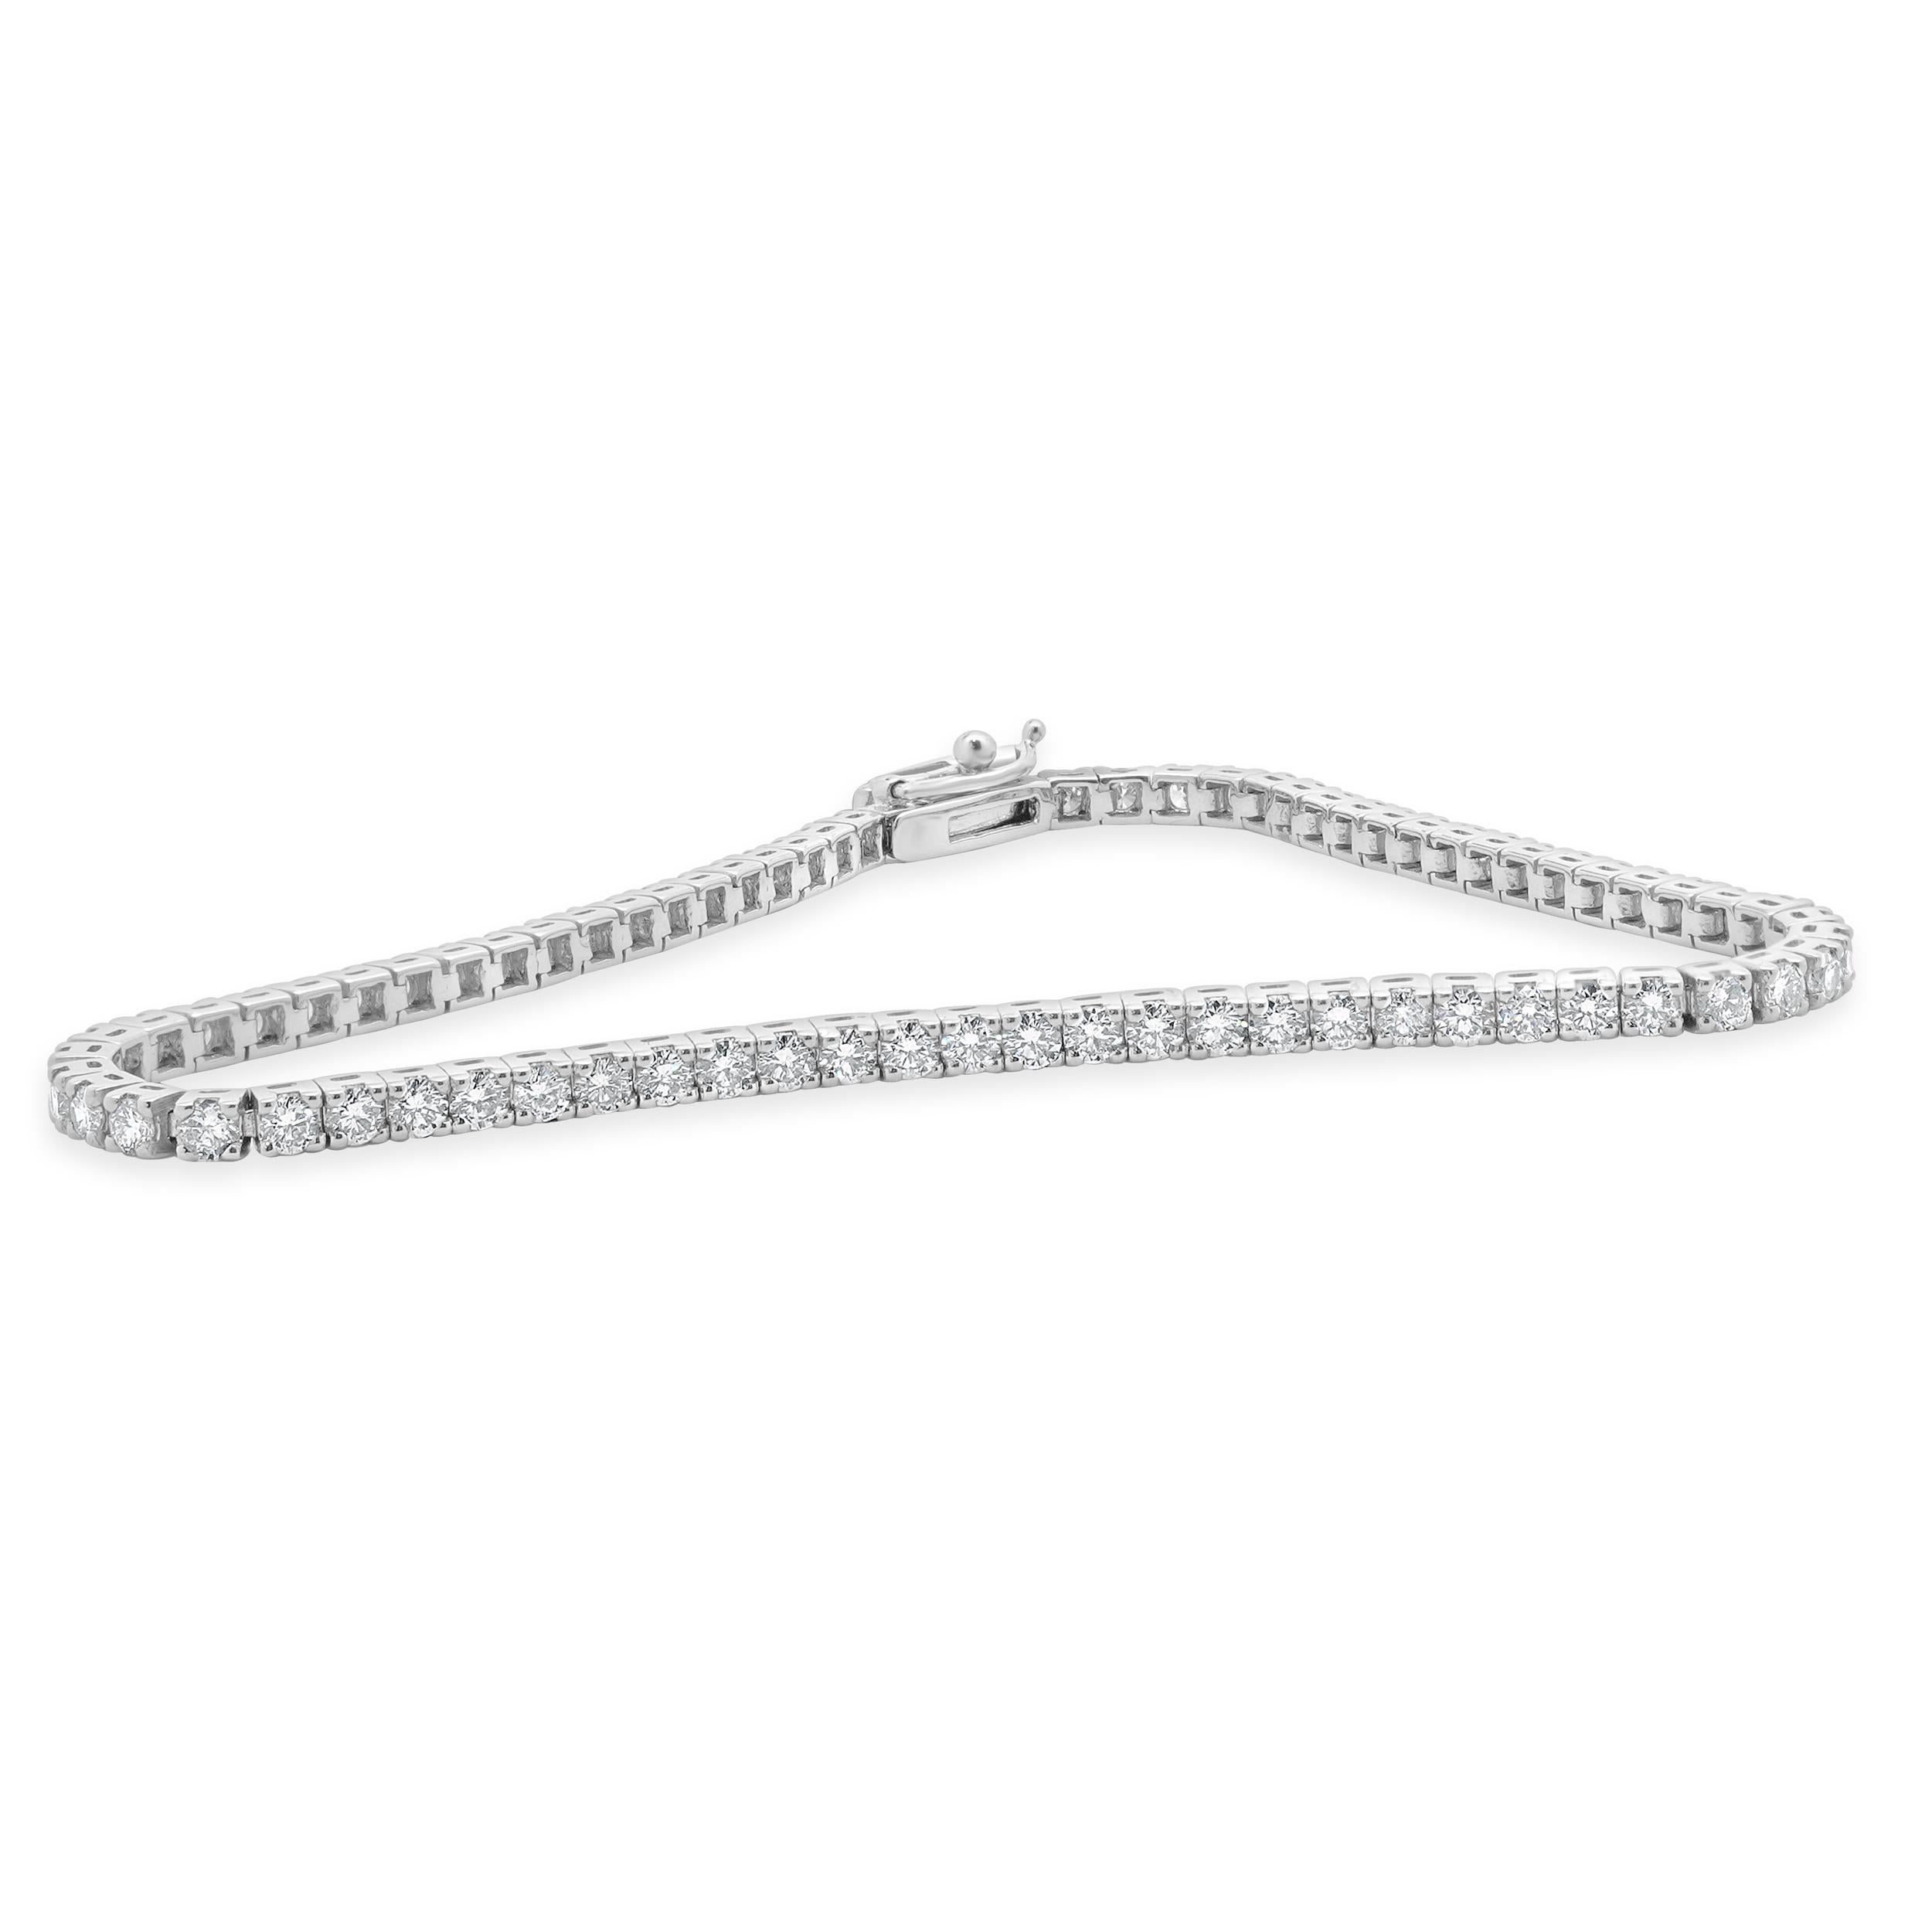 Designer: custom
Material: 14K white gold
Diamond: 70 round brilliant cut = 2.96cttw
Color: H
Clarity: SI1-2
Dimensions: bracelet will fit up to a 7-inch wrist
Weight: 7.60 grams